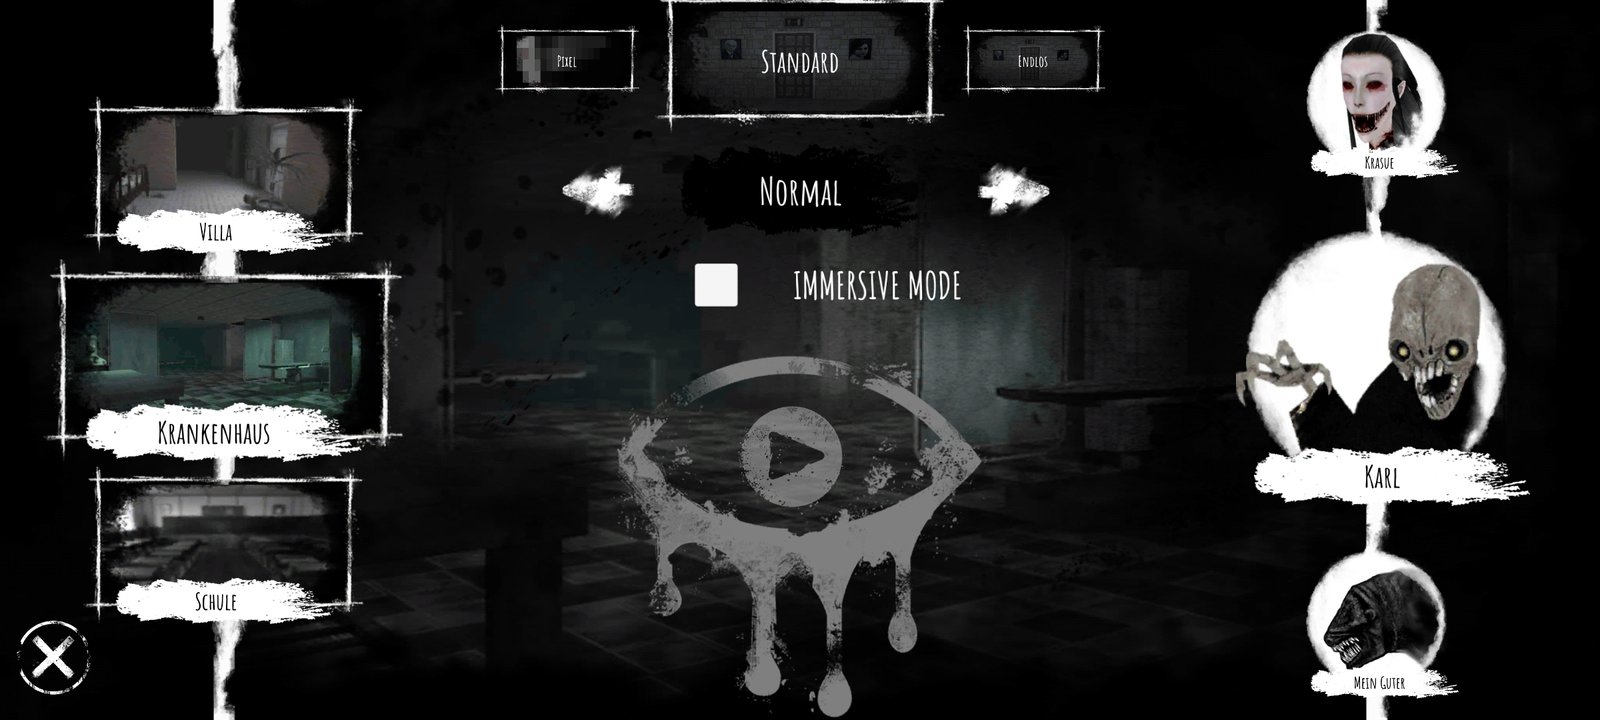 Eyes Horror & Coop Multiplayer App Stats: Downloads, Users and